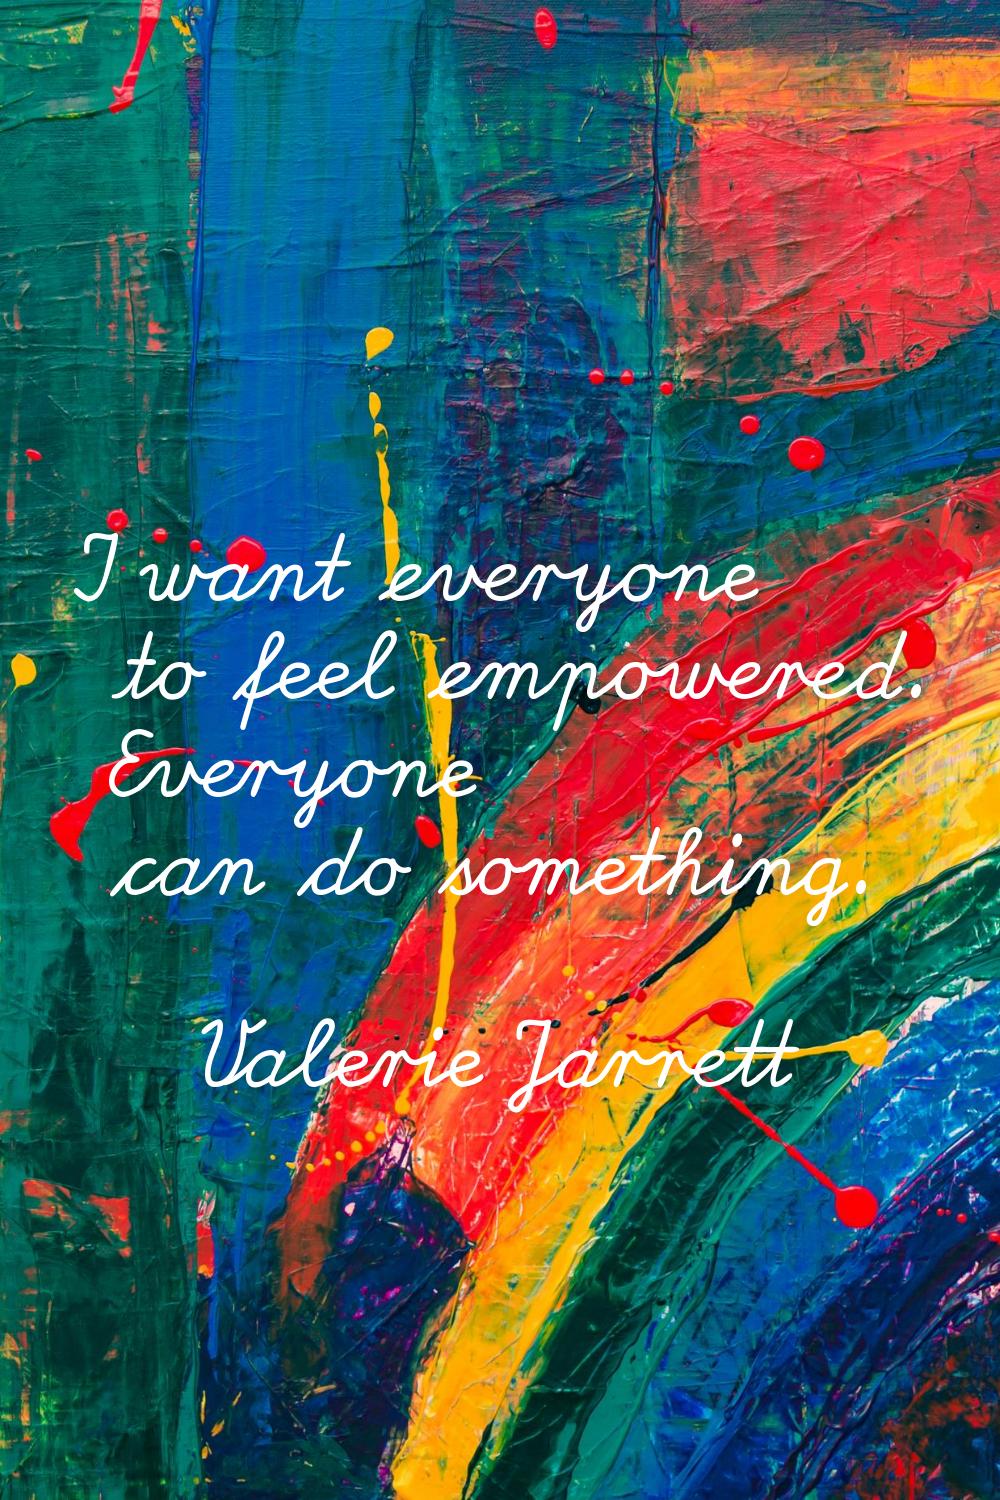 I want everyone to feel empowered. Everyone can do something.